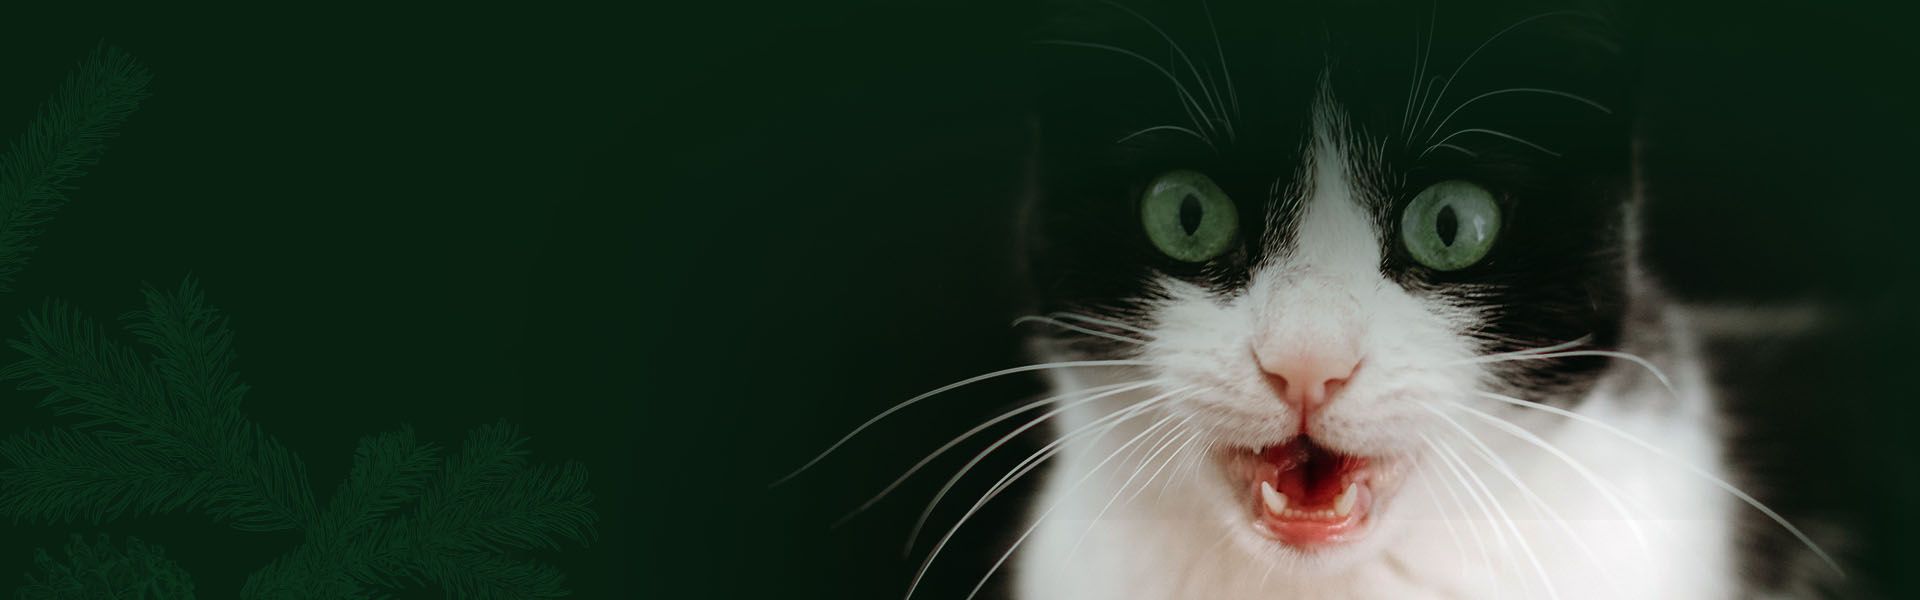 funny black and white cat with green eyes open mouth